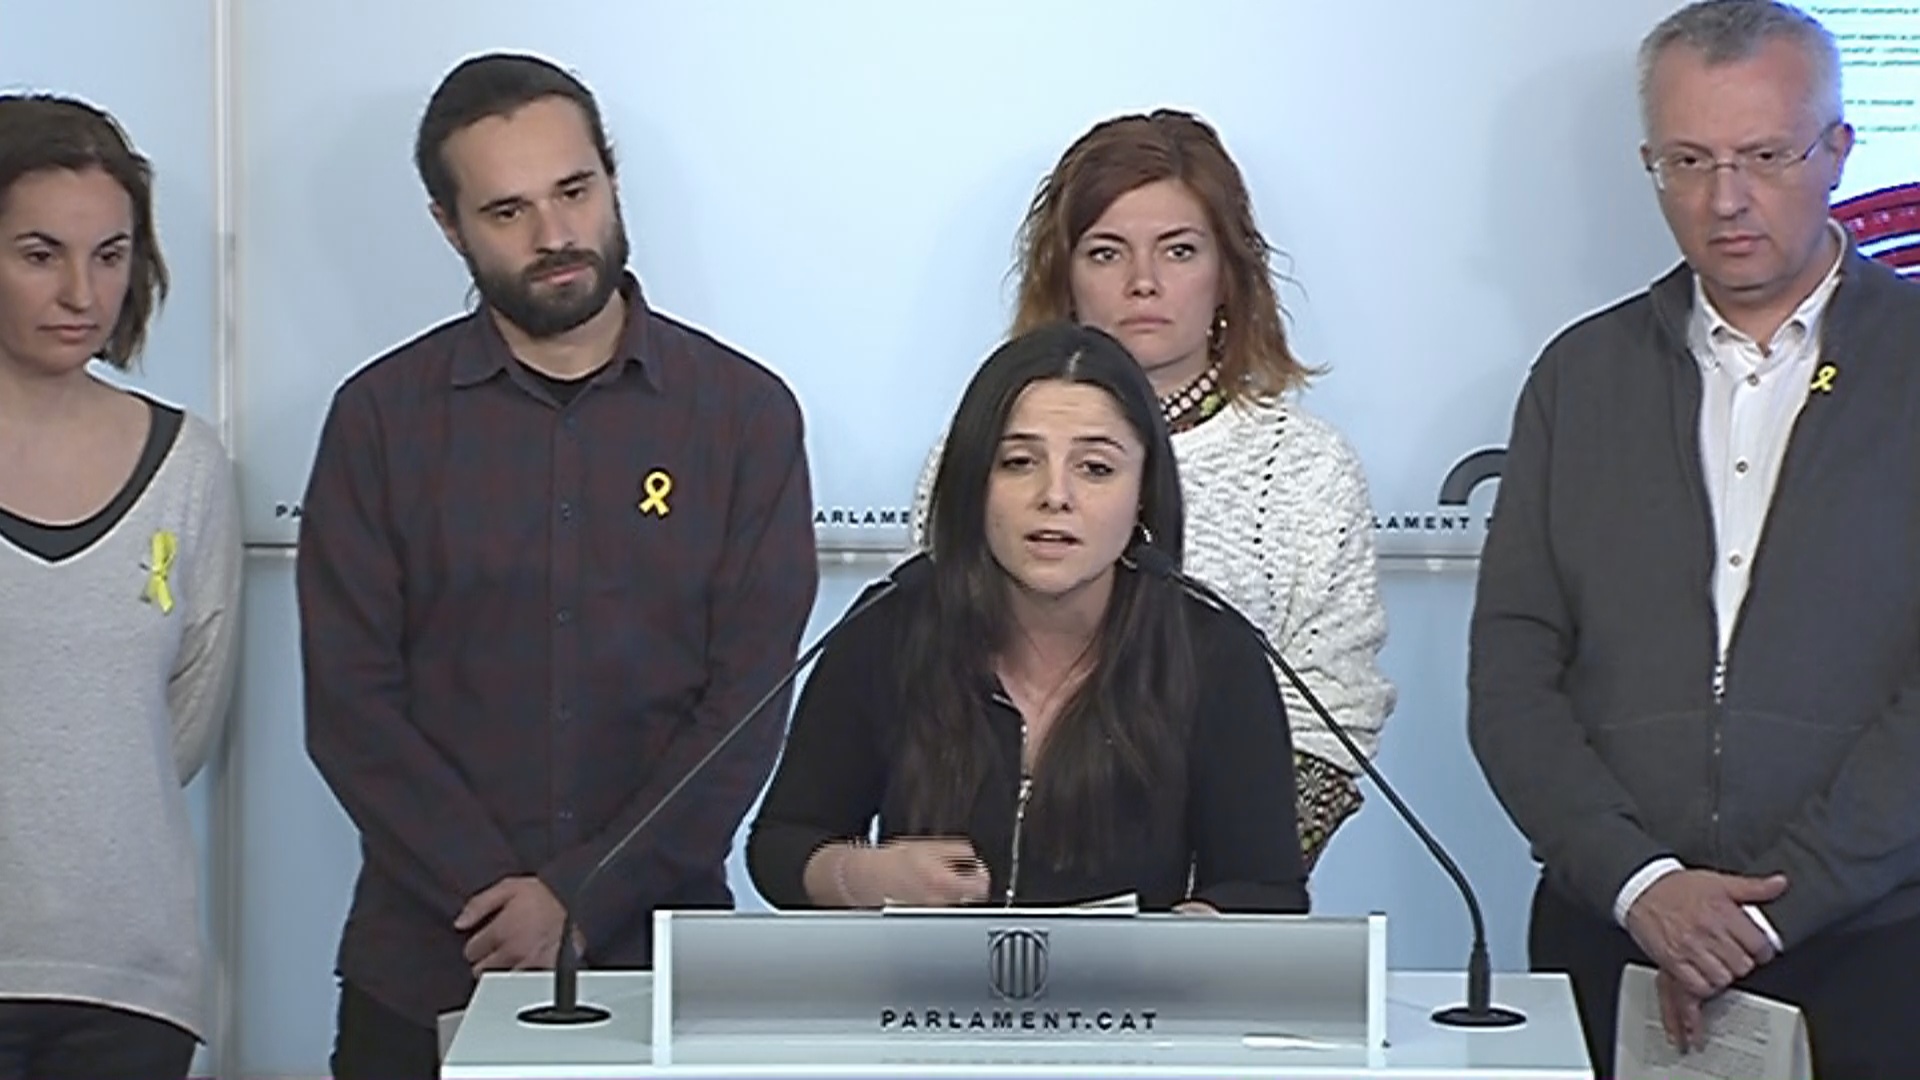 From left to right: Anna Caula and Gerard Gómez del Moral (ERC), Maria Sirvent (at the lectern, CUP), Elisenda Alemany (CatECP), and Josep Maria Forné (JxCat) reading the statement criticizing the Supreme Court decision on March 23 2018 (image courtesy of